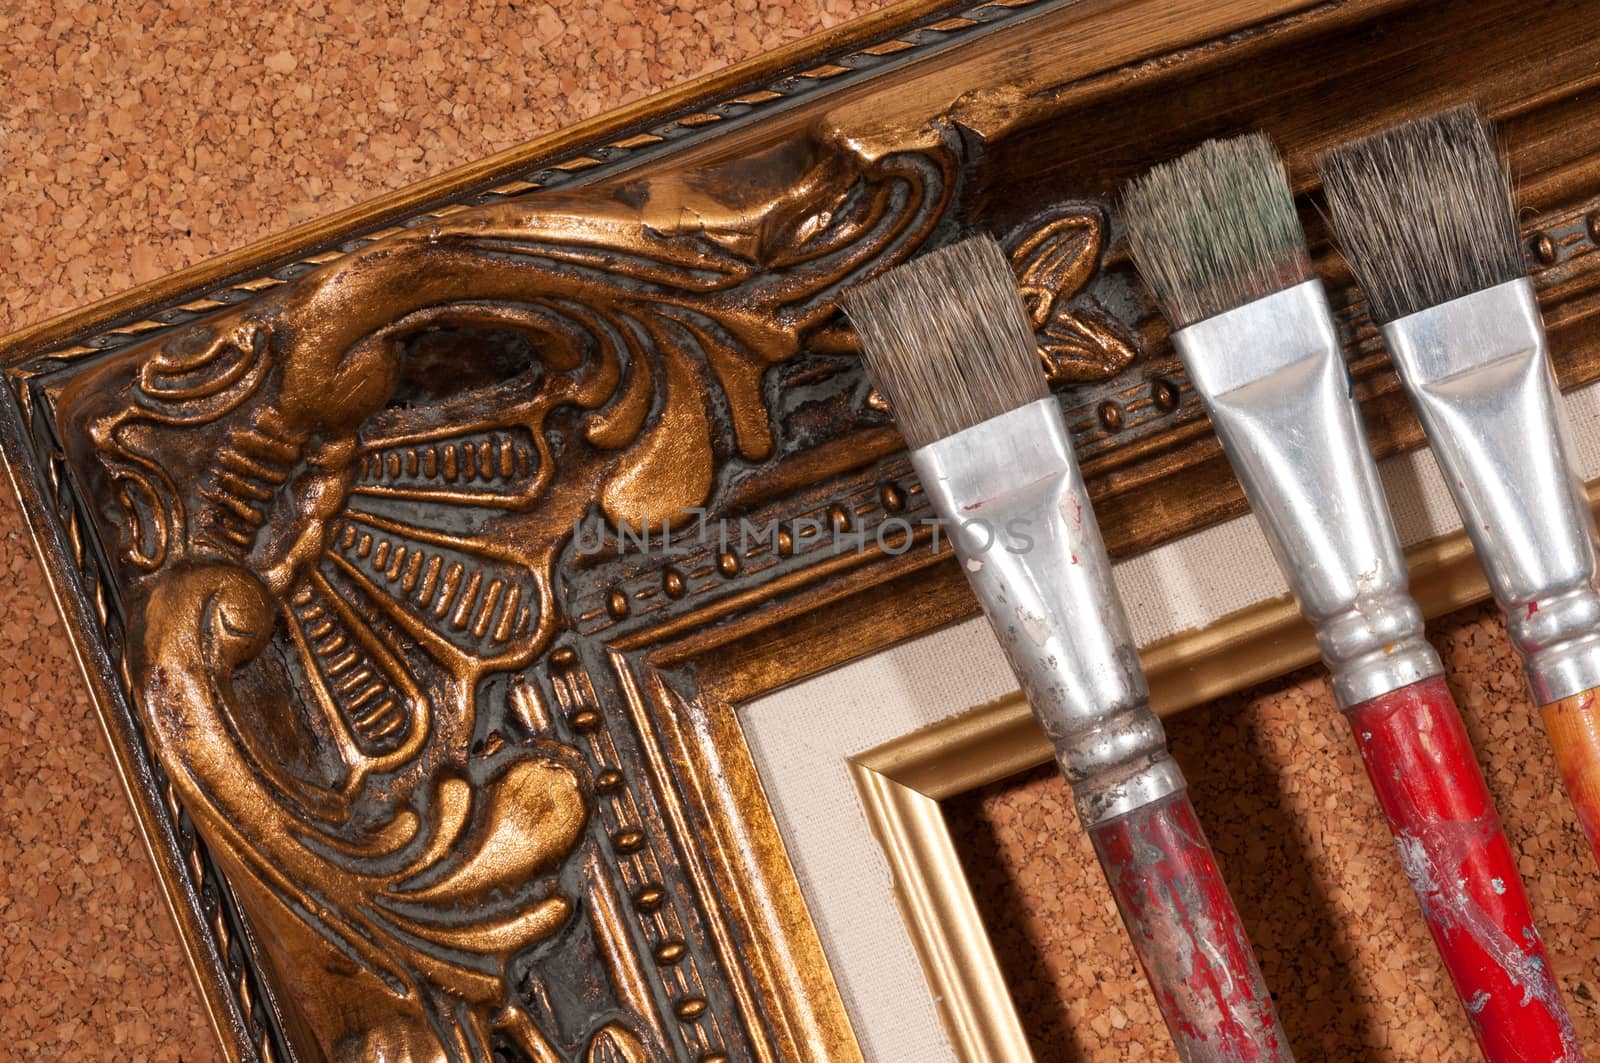 Paint brushes and wood picture frame.